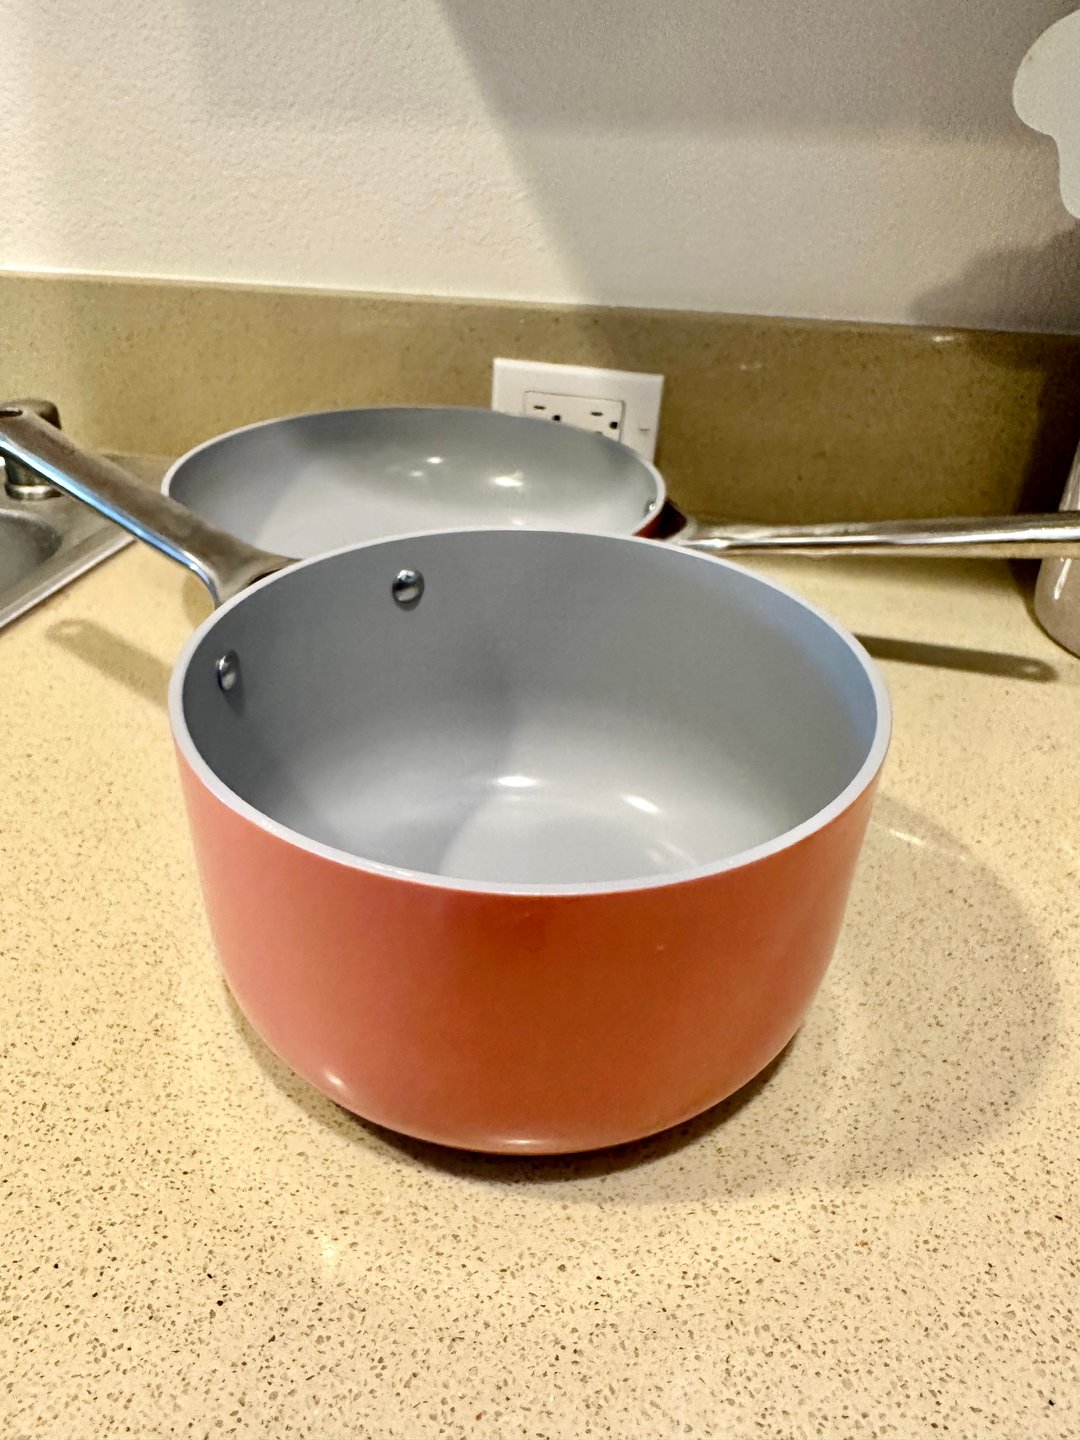 I've been cooking with Caraway's cookware set and the investment has mostly  paid off